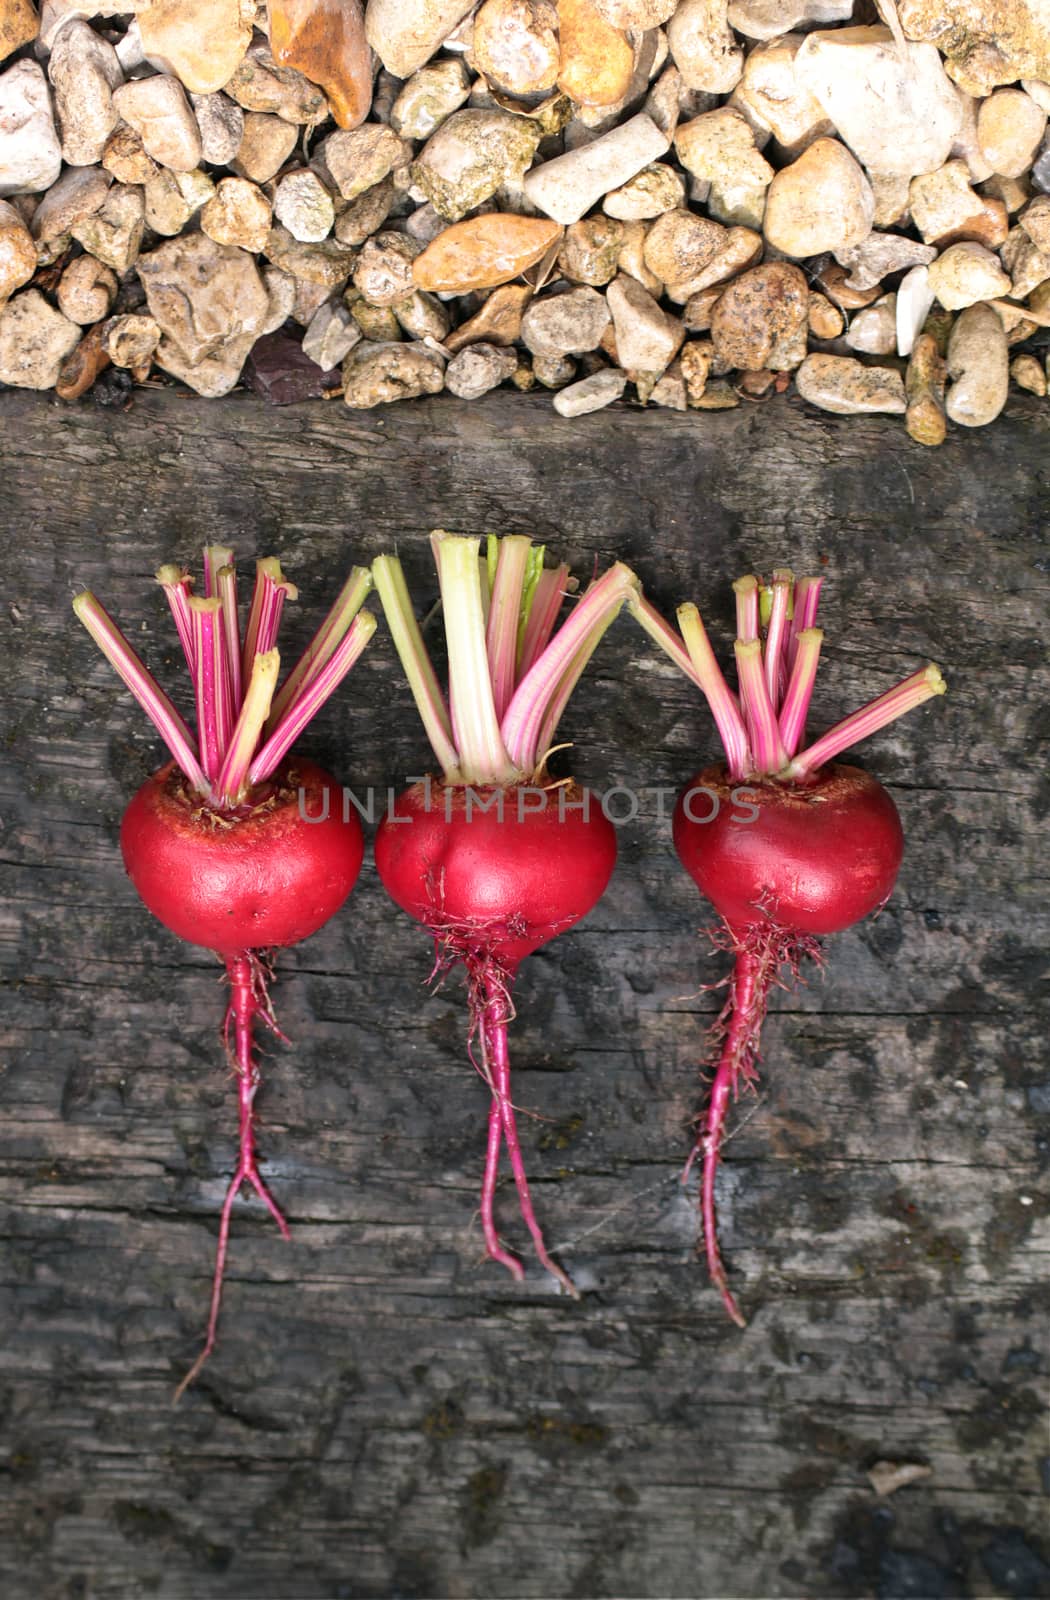 Beets in a line by naffarts2